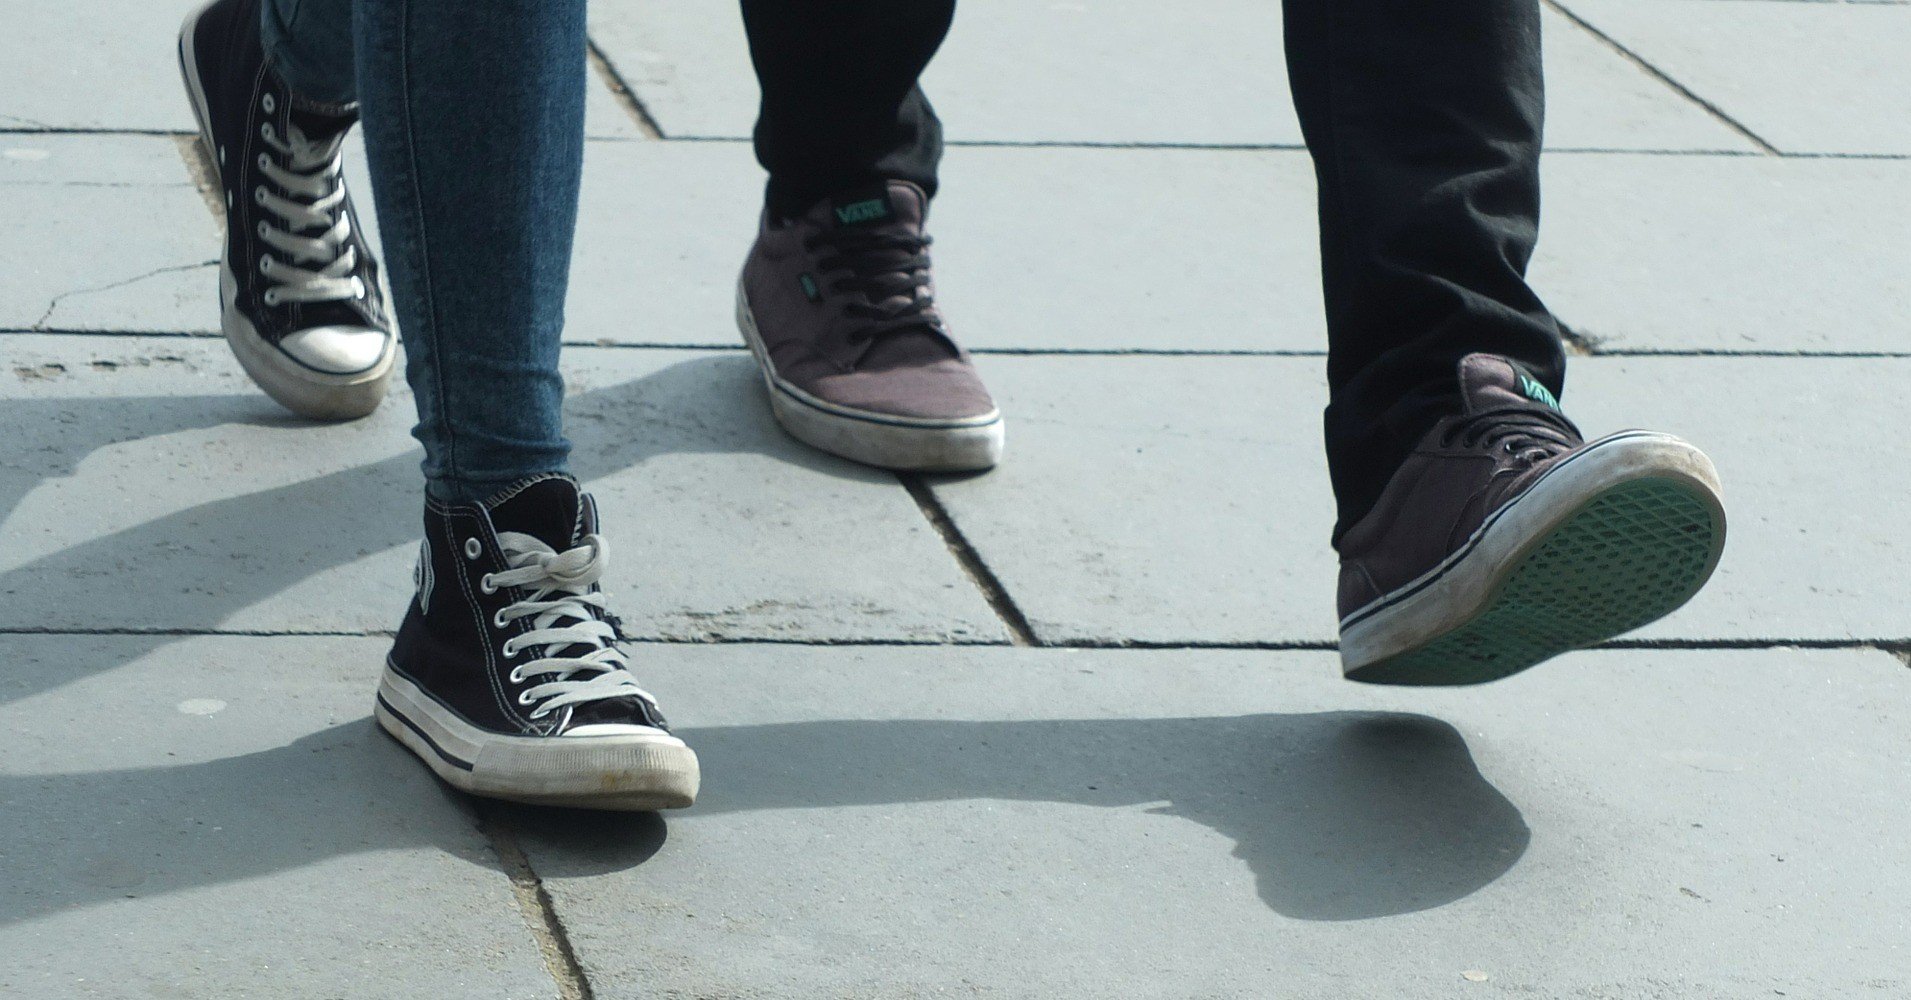 Two pair of legs in sneakers walking on a pavement.